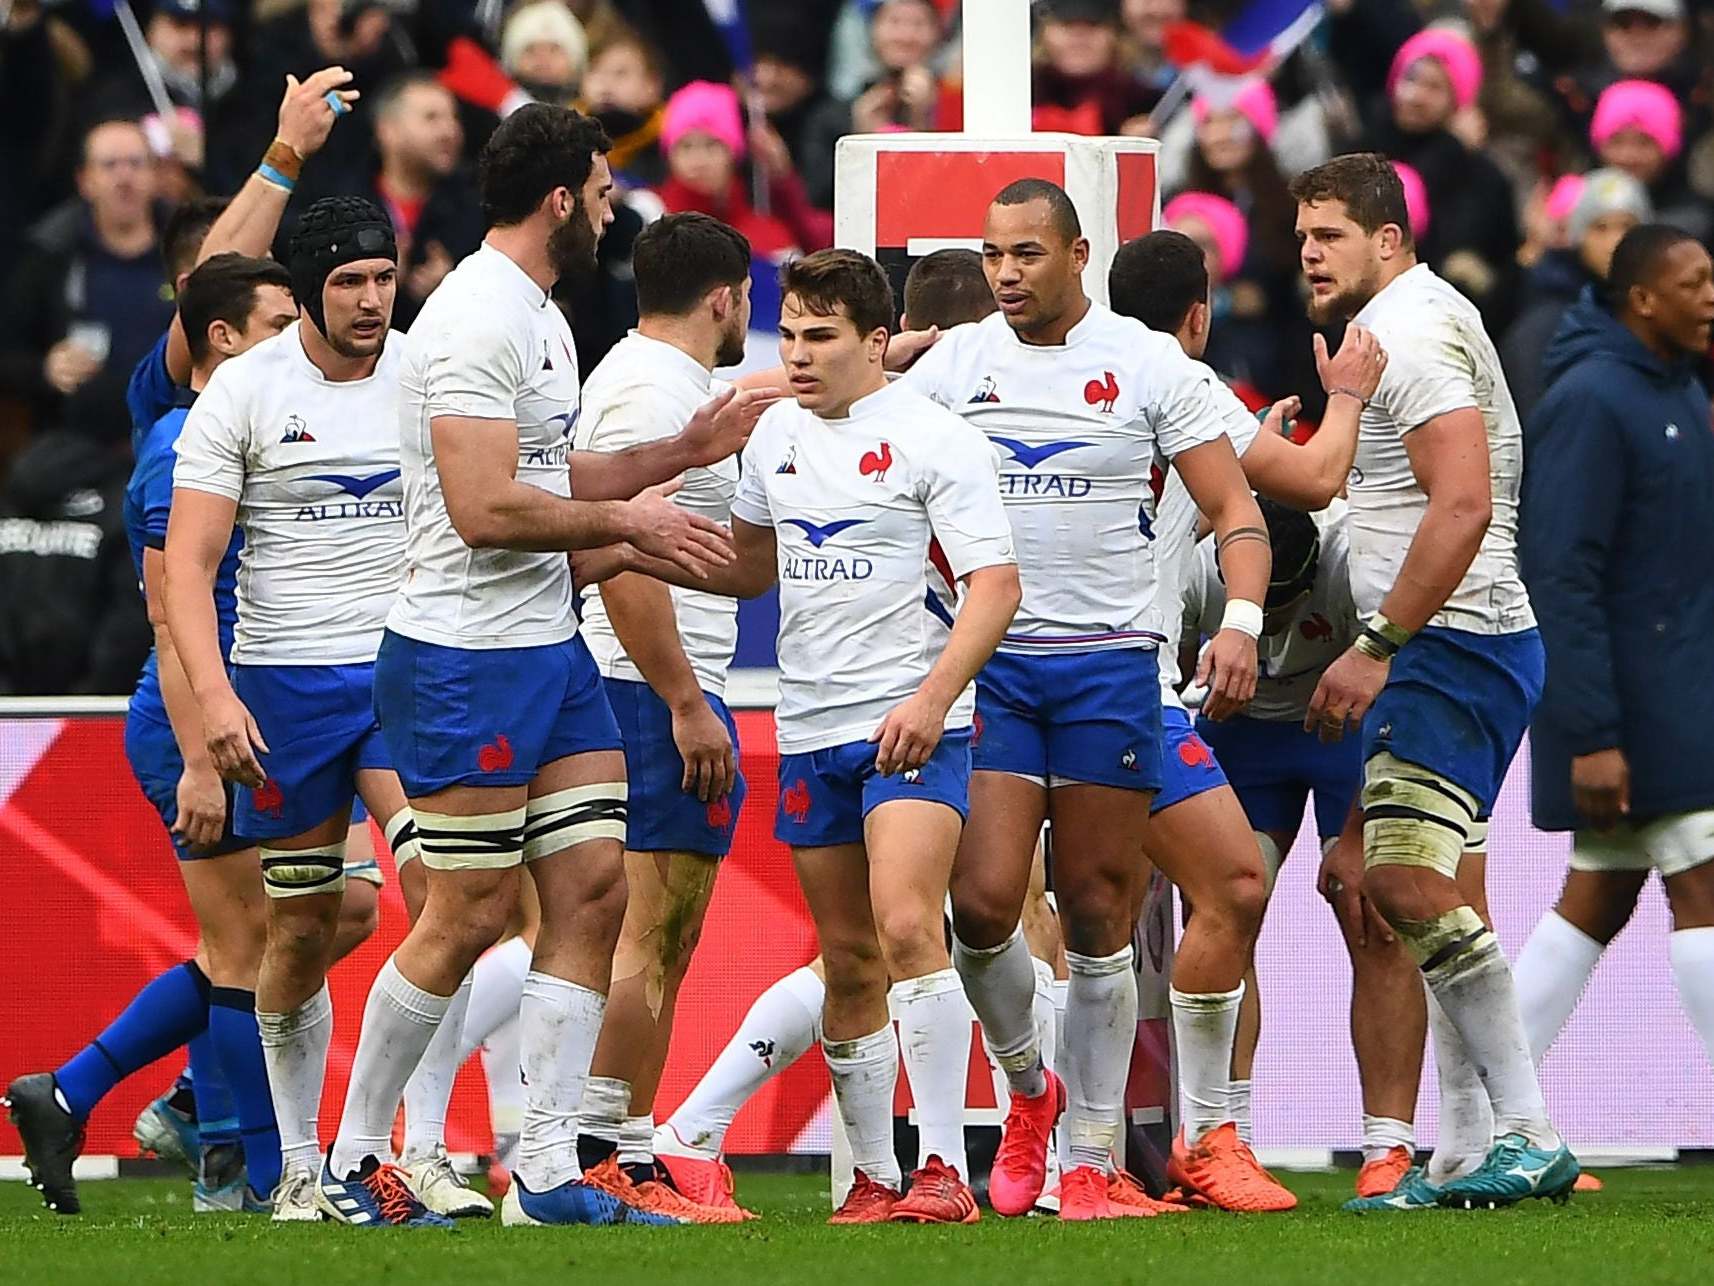 France scored five tries at the Stade de France